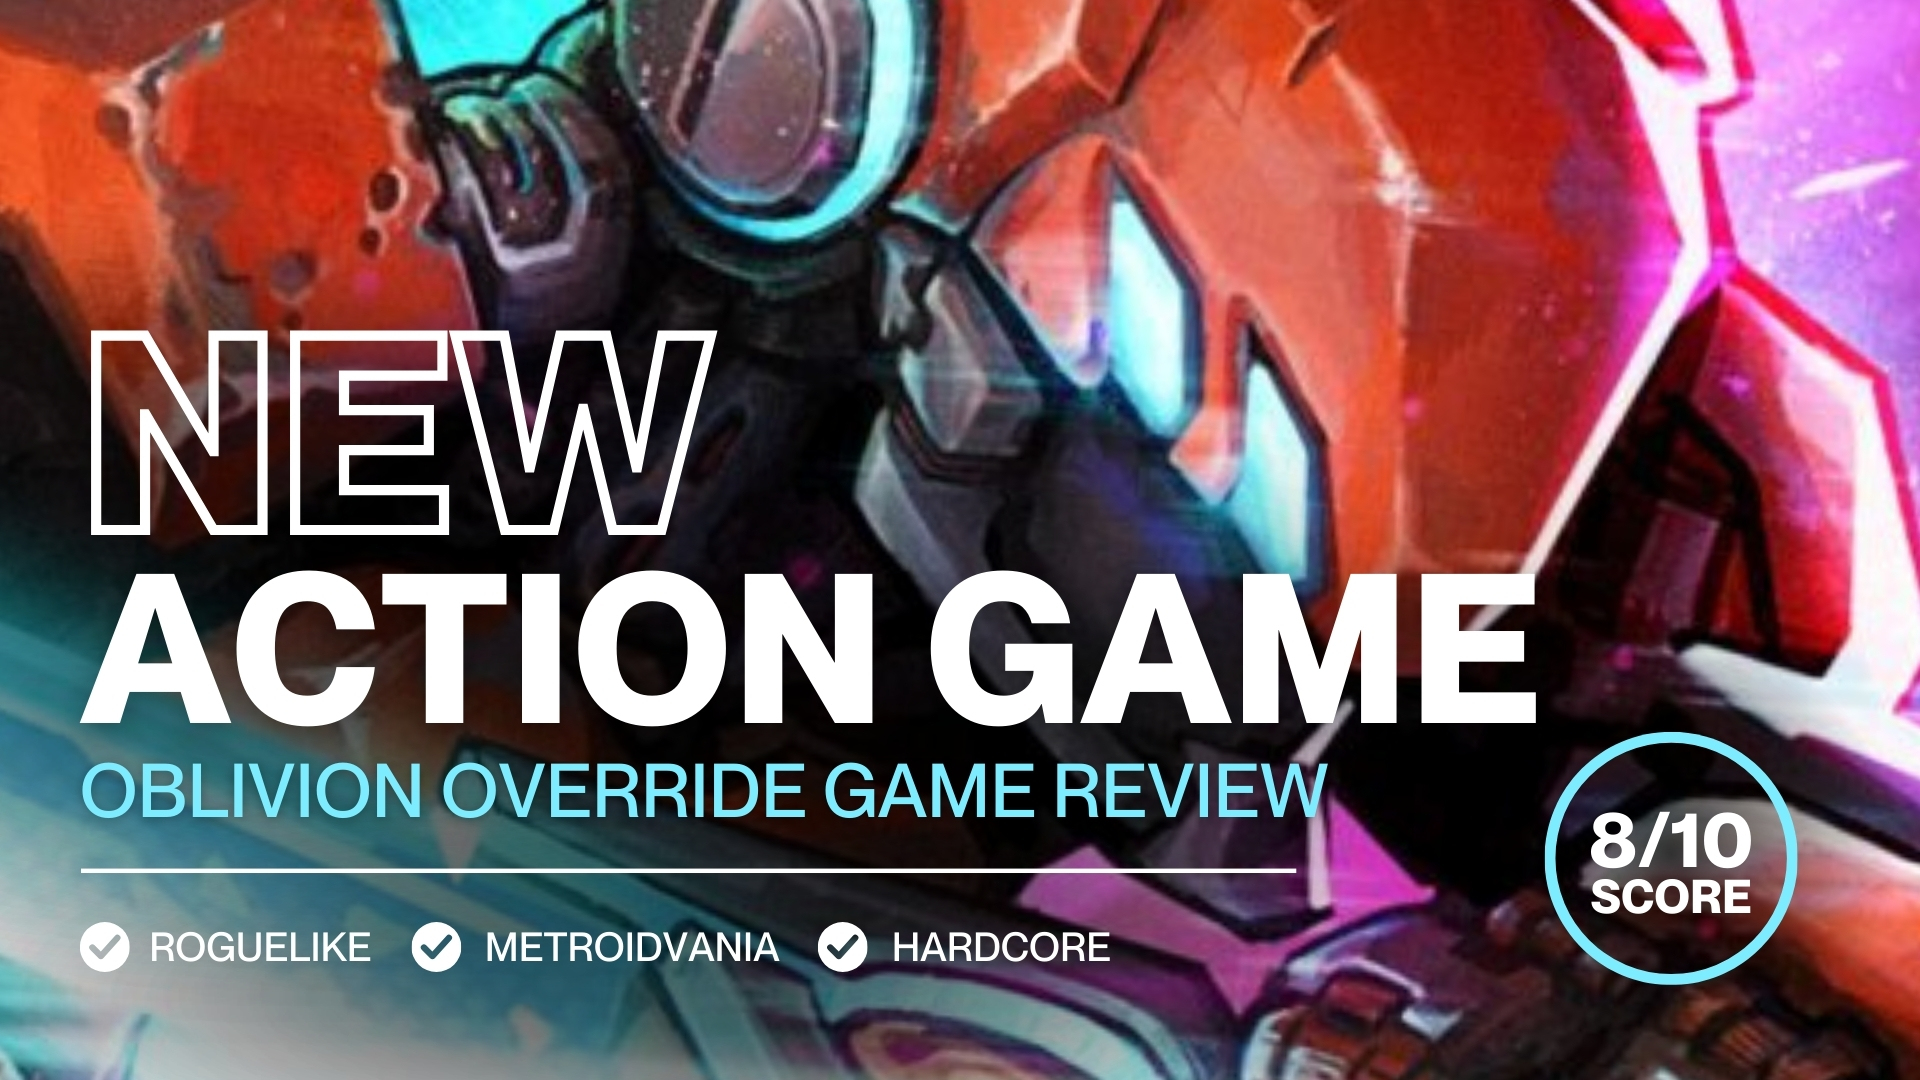 NEW Roguelike HARDCORE Action GAME - Oblivion Override Review